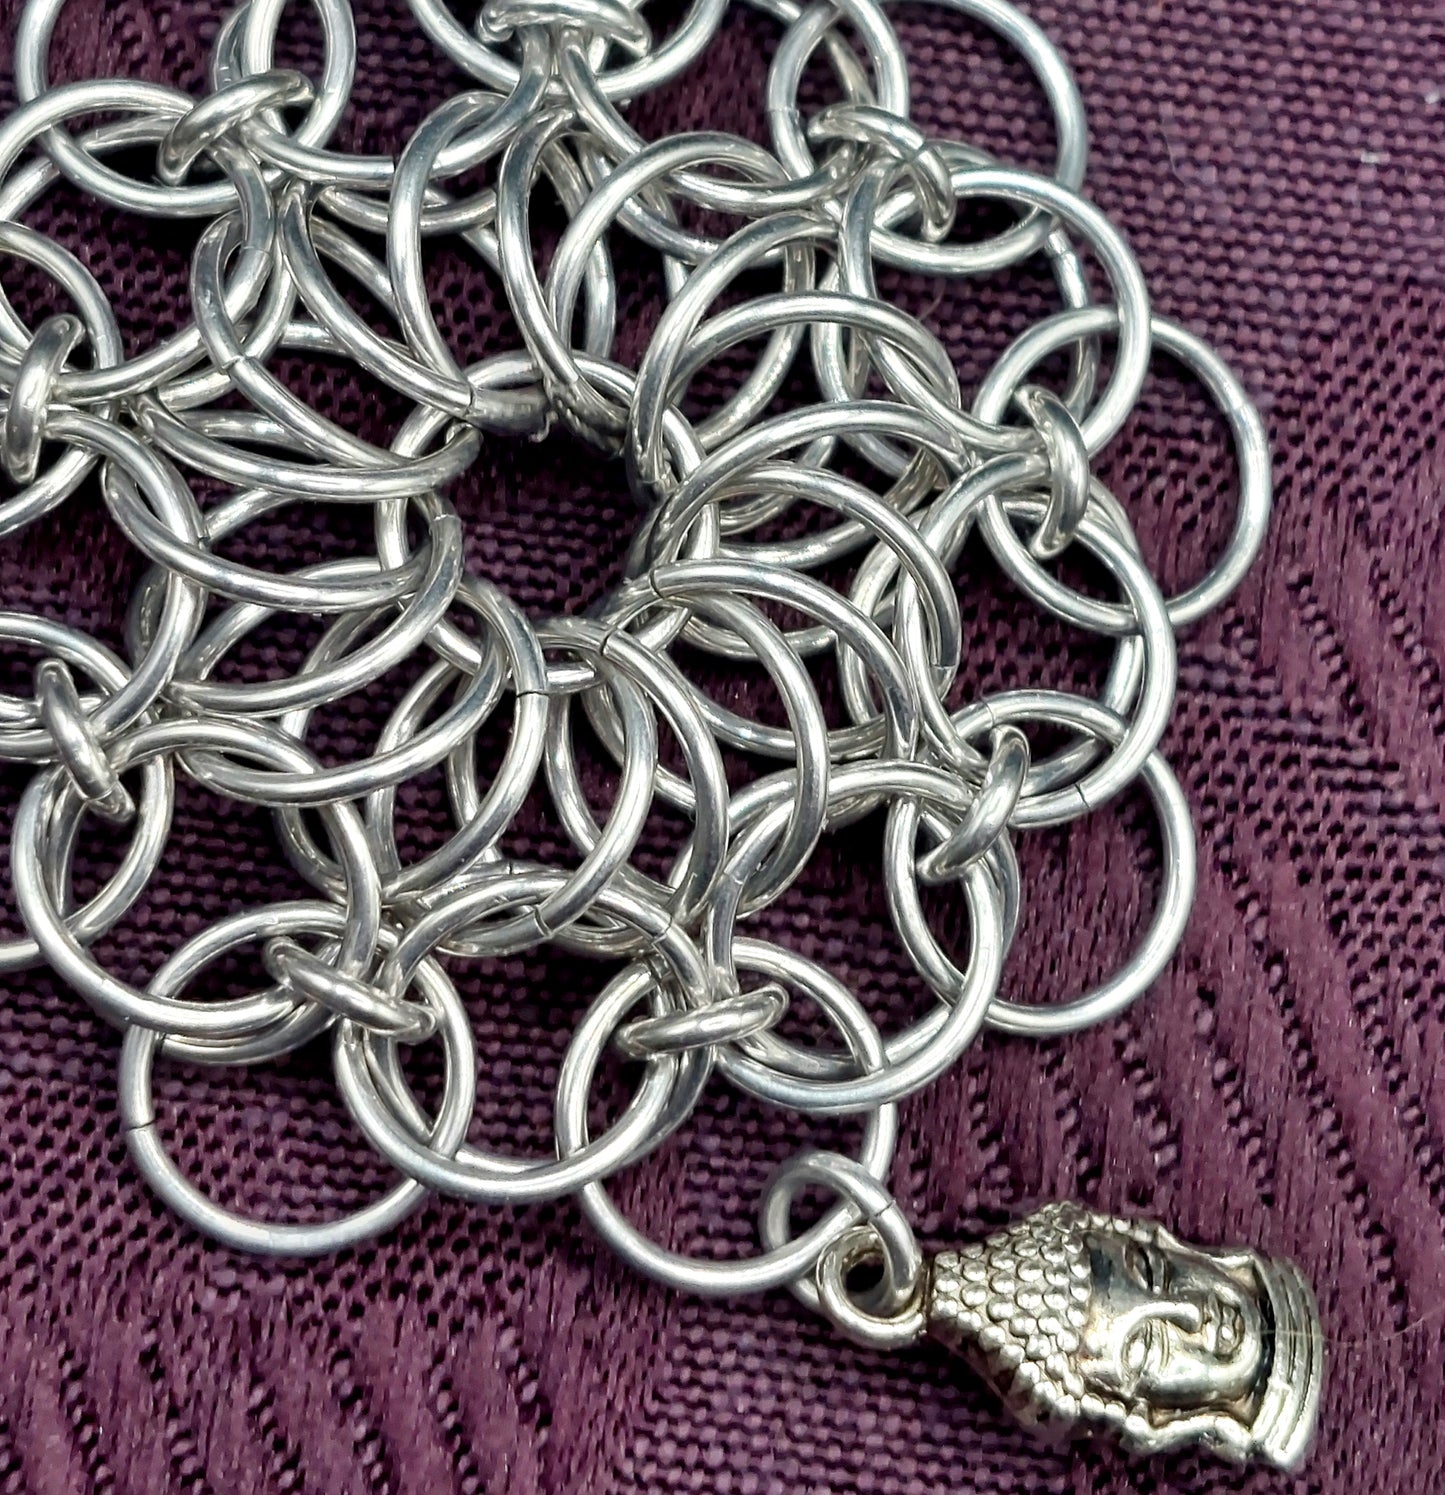 Flower/Dreamcatcher Chain Maille Ornaments - Locally Made